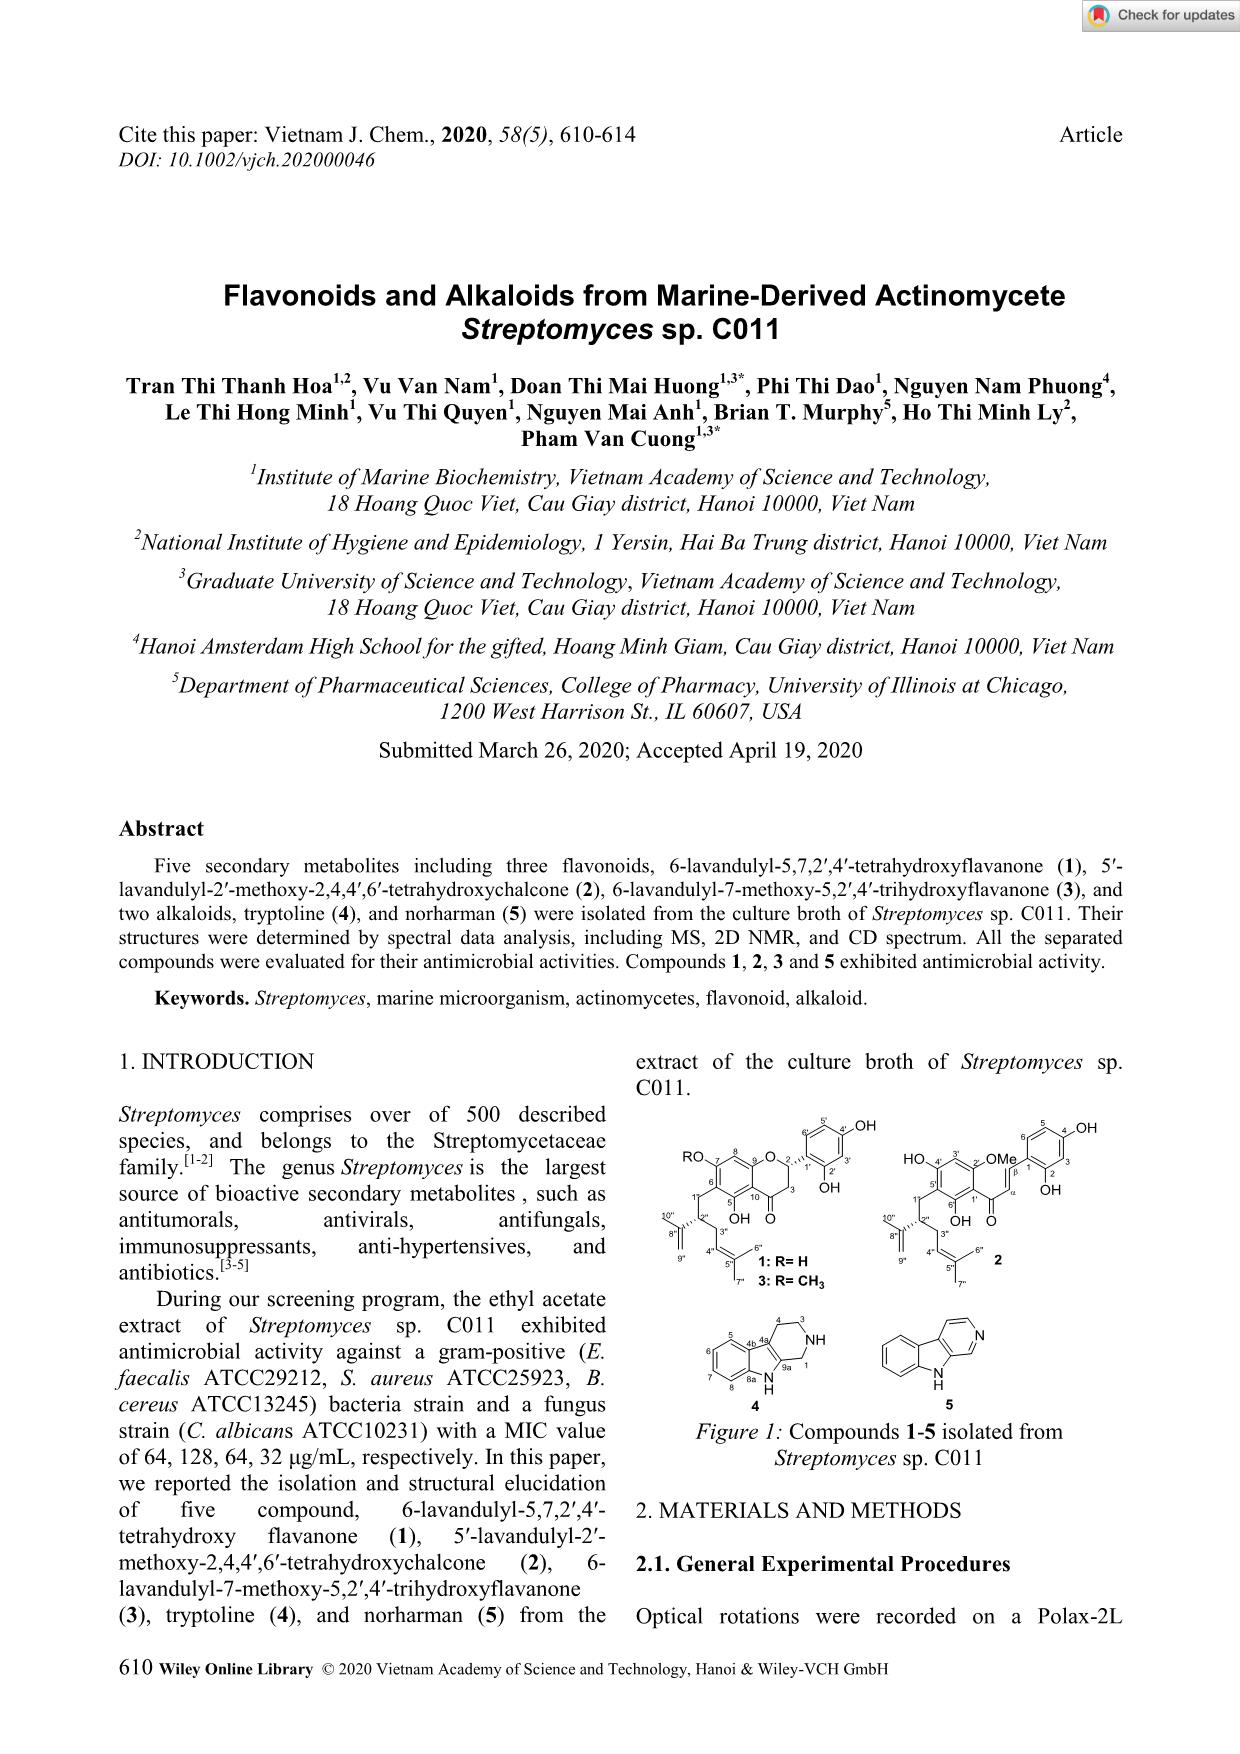 Flavonoids and Alkaloids from Marine-Derived Actinomycete Streptomyces sp. C011 trang 1